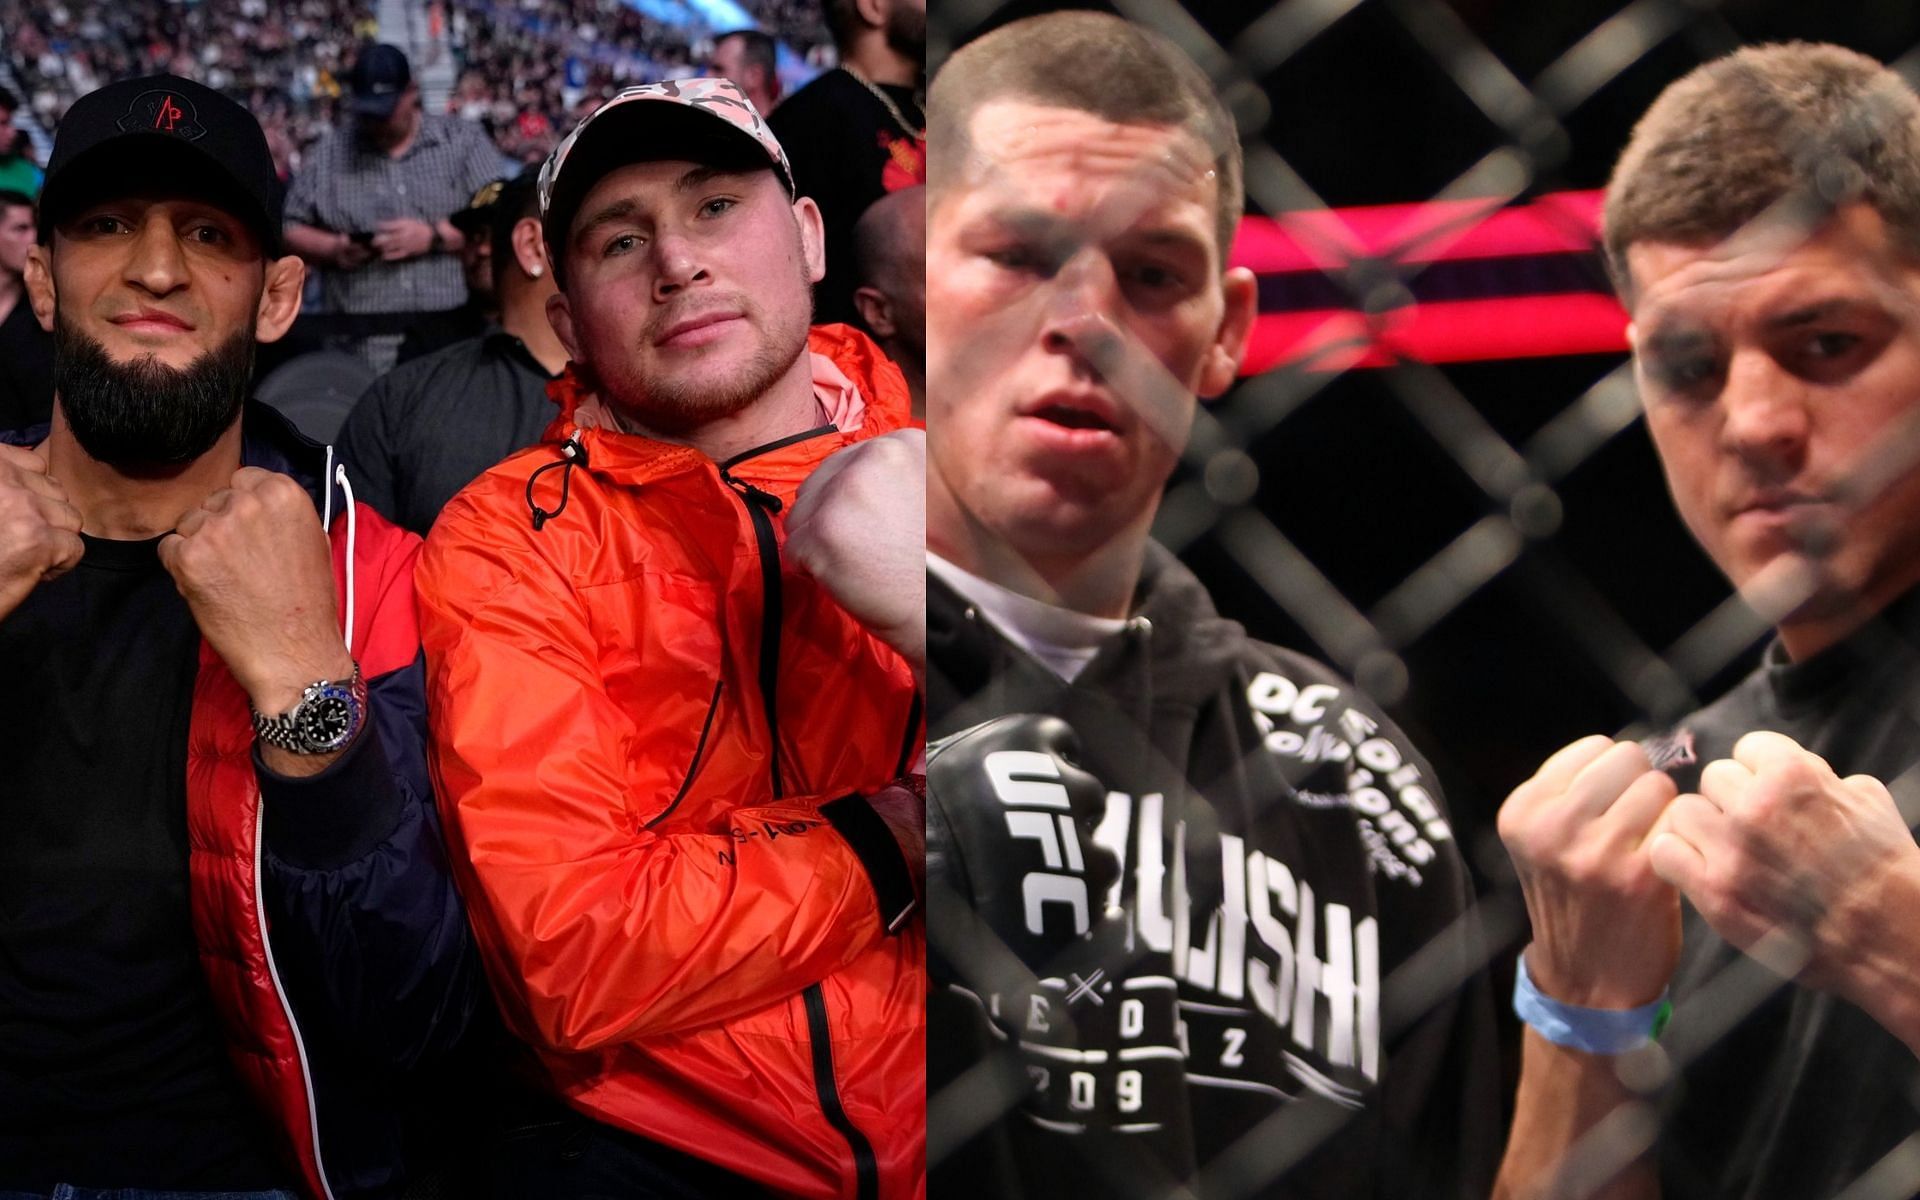 Khamzat Chimaev and Darren Till (Far left and left). Nate Diaz and Nick Diaz (right and far right) [Images Courtesy: Getty]